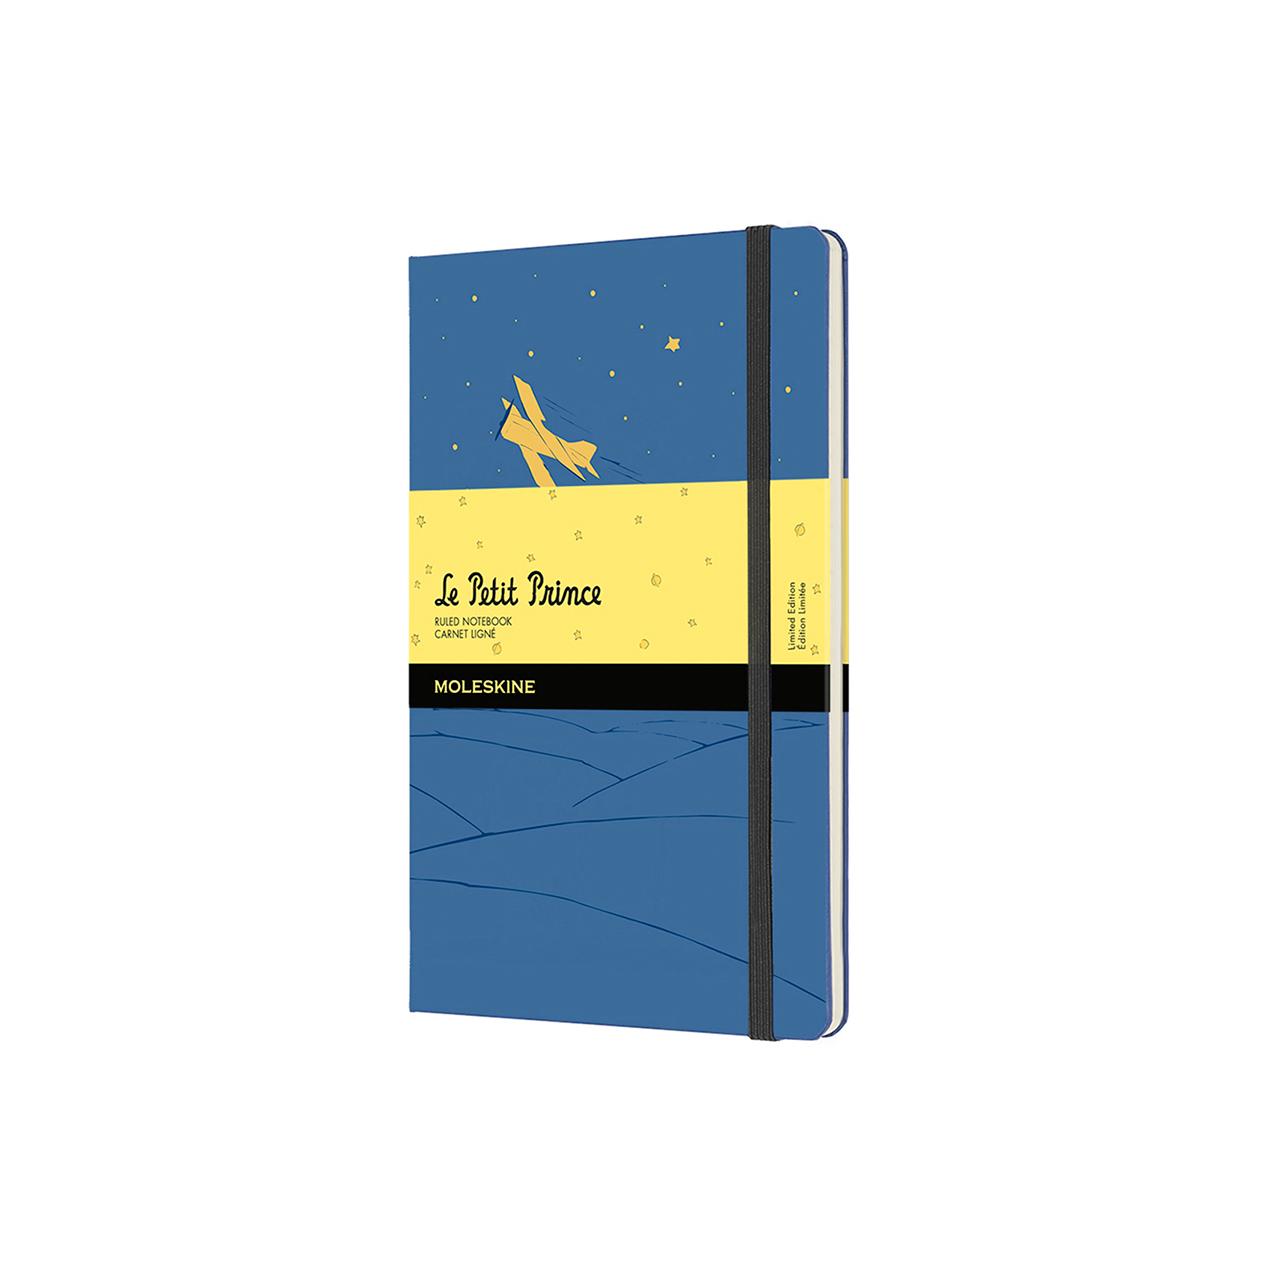 Moleskine - Limited Edition Le Petite Prince Notebook - Ruled - Forget Blue